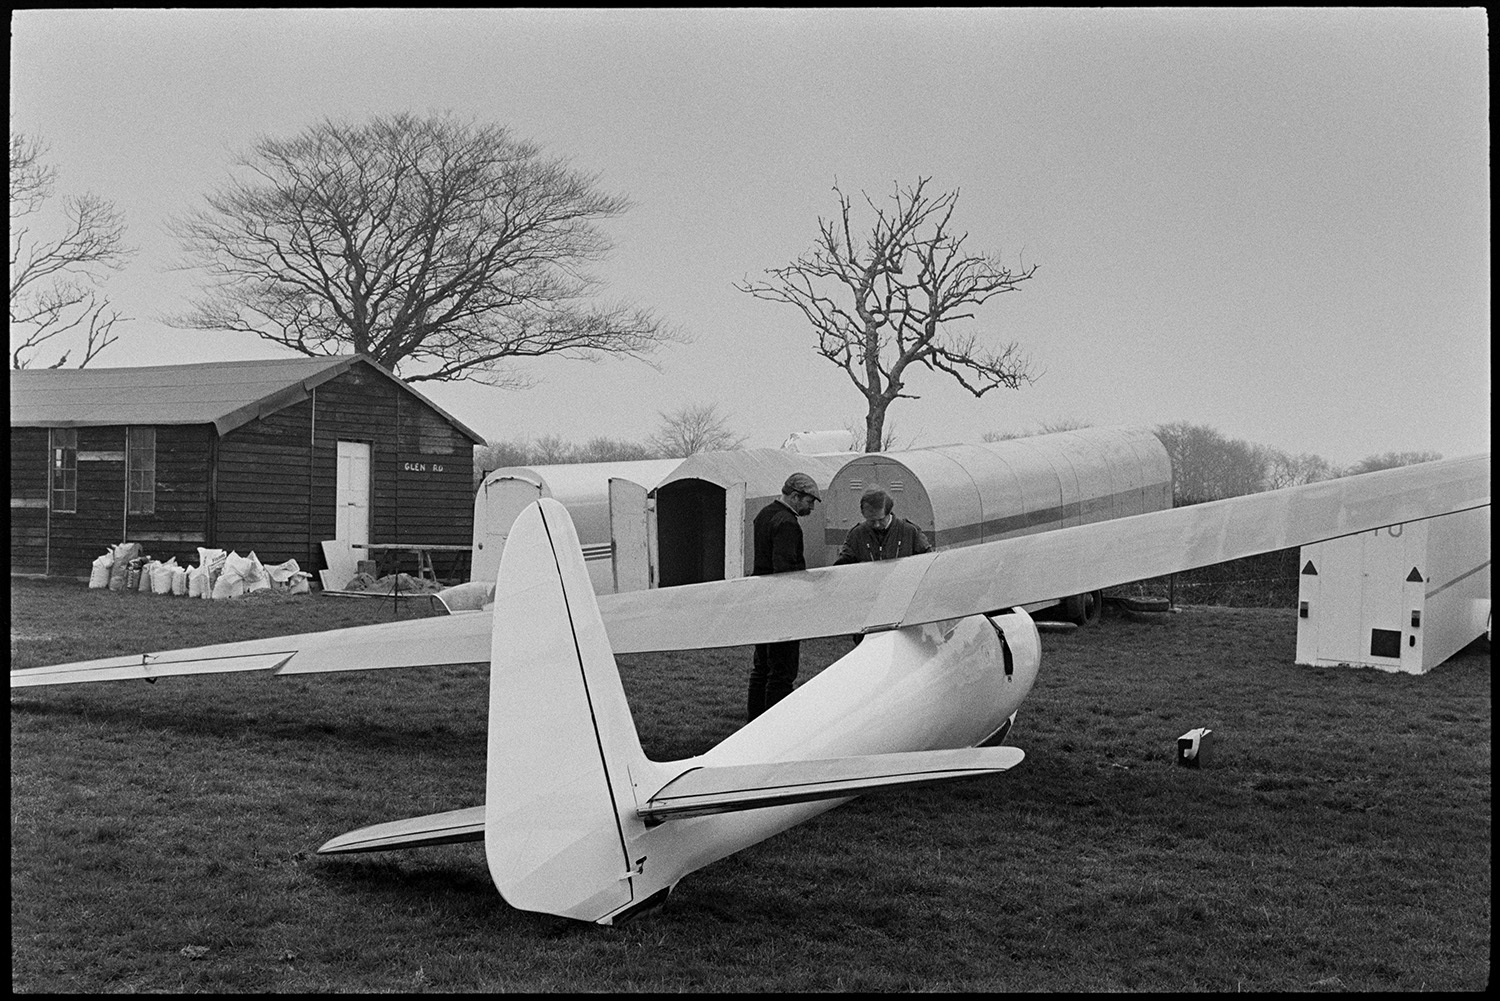 Glider at flying club. 
[Two men looking at a glider in a field at a flying club at Eaglescott, Burrington. Various trailers on wheels can be seen next to a wooden shed in the background.]